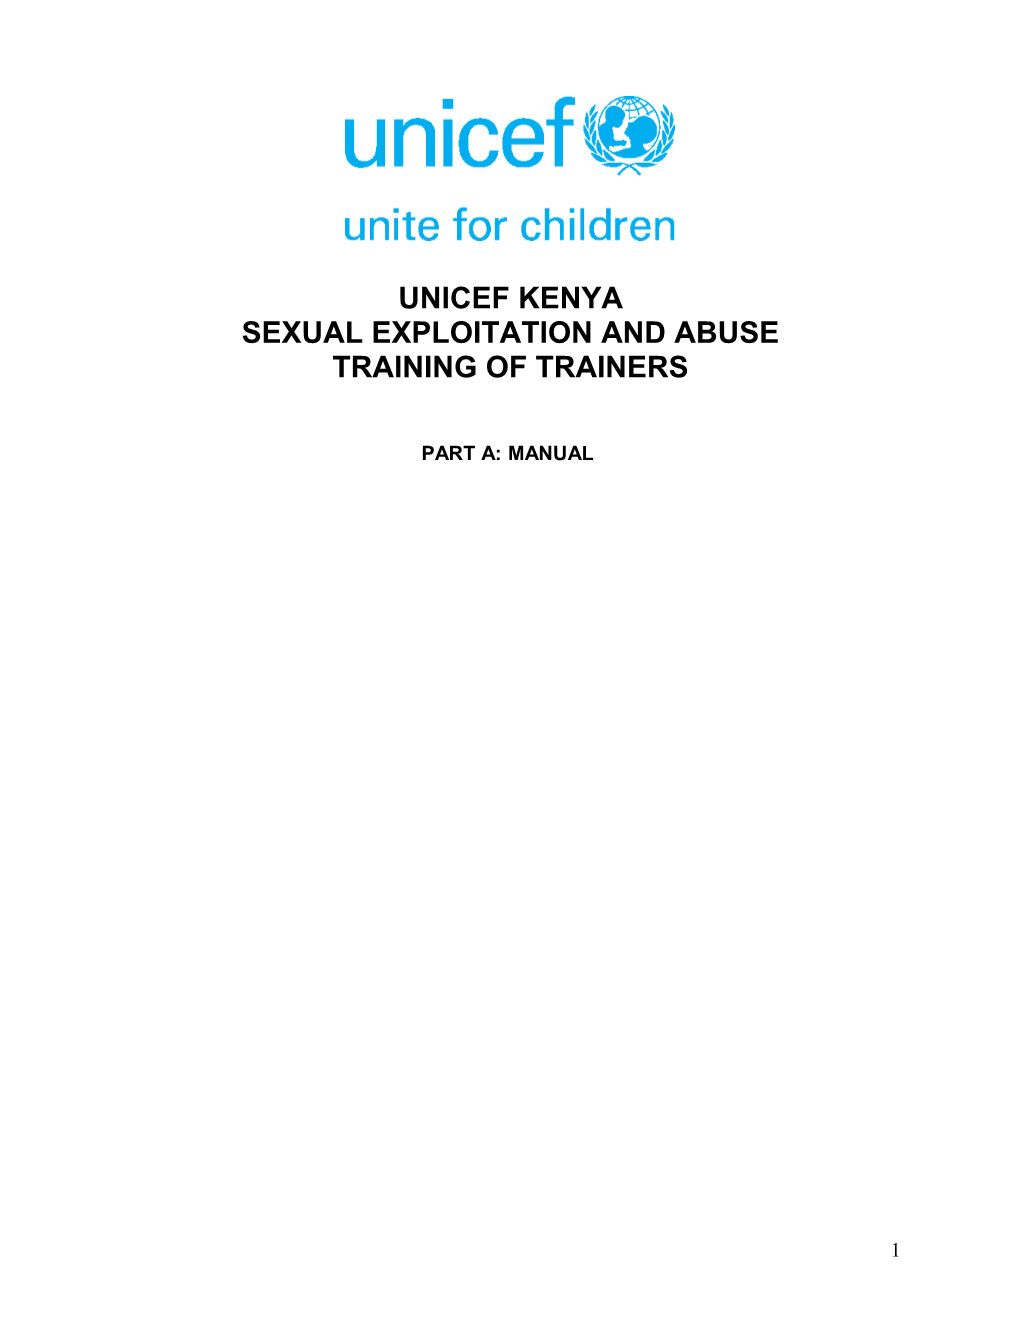 Sexual Exploitation and Abuse